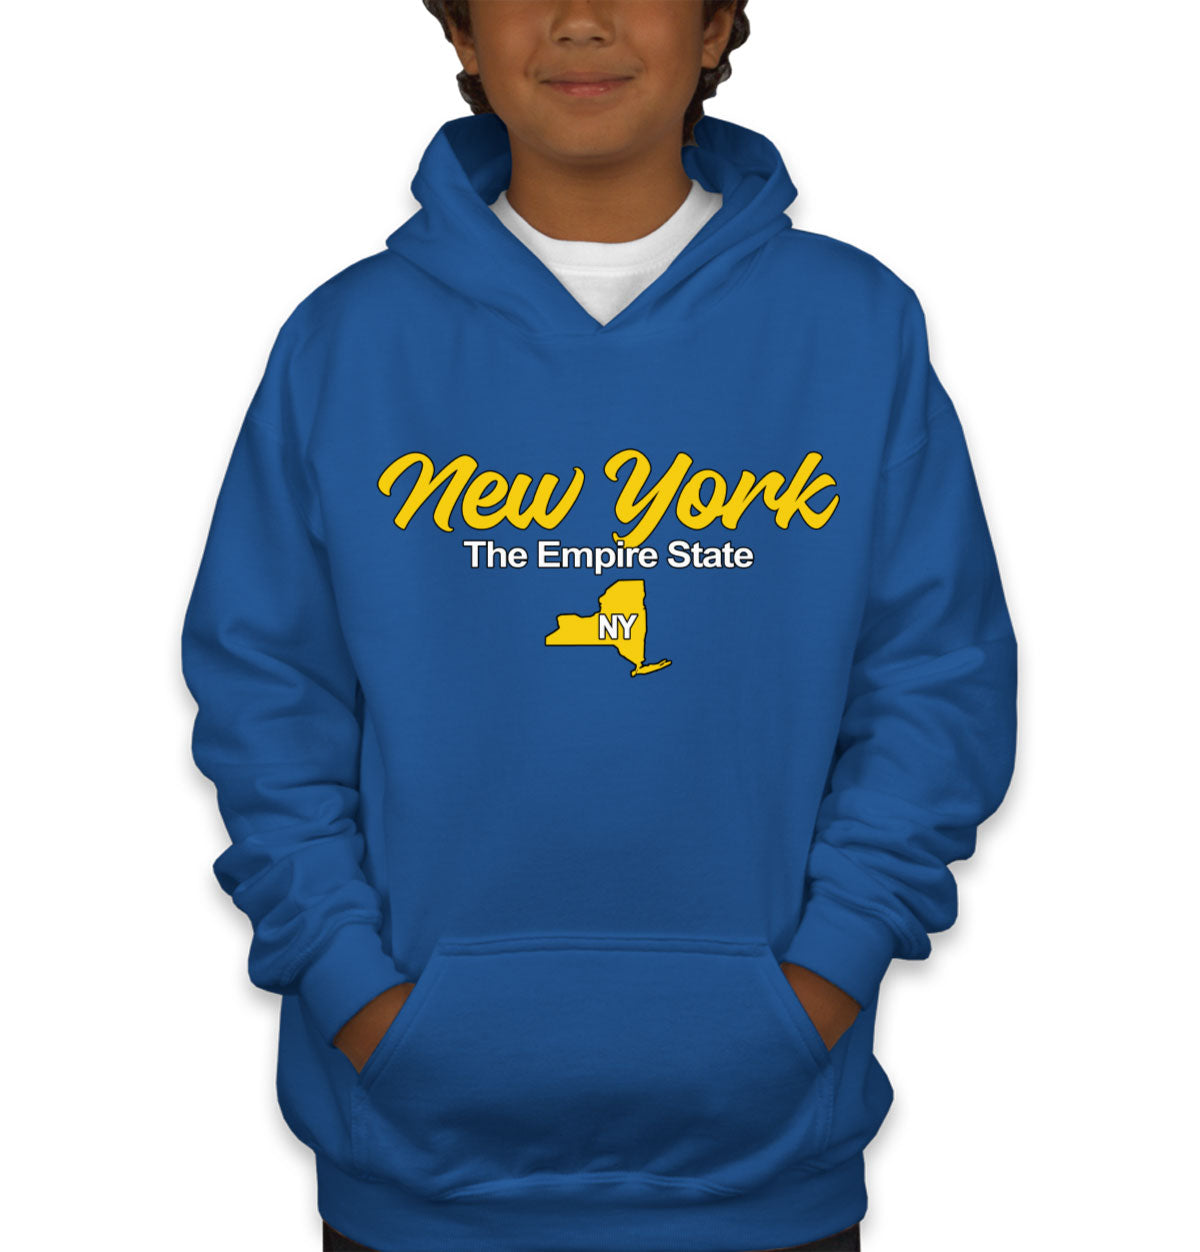 New York The Empire State Youth Hoodie